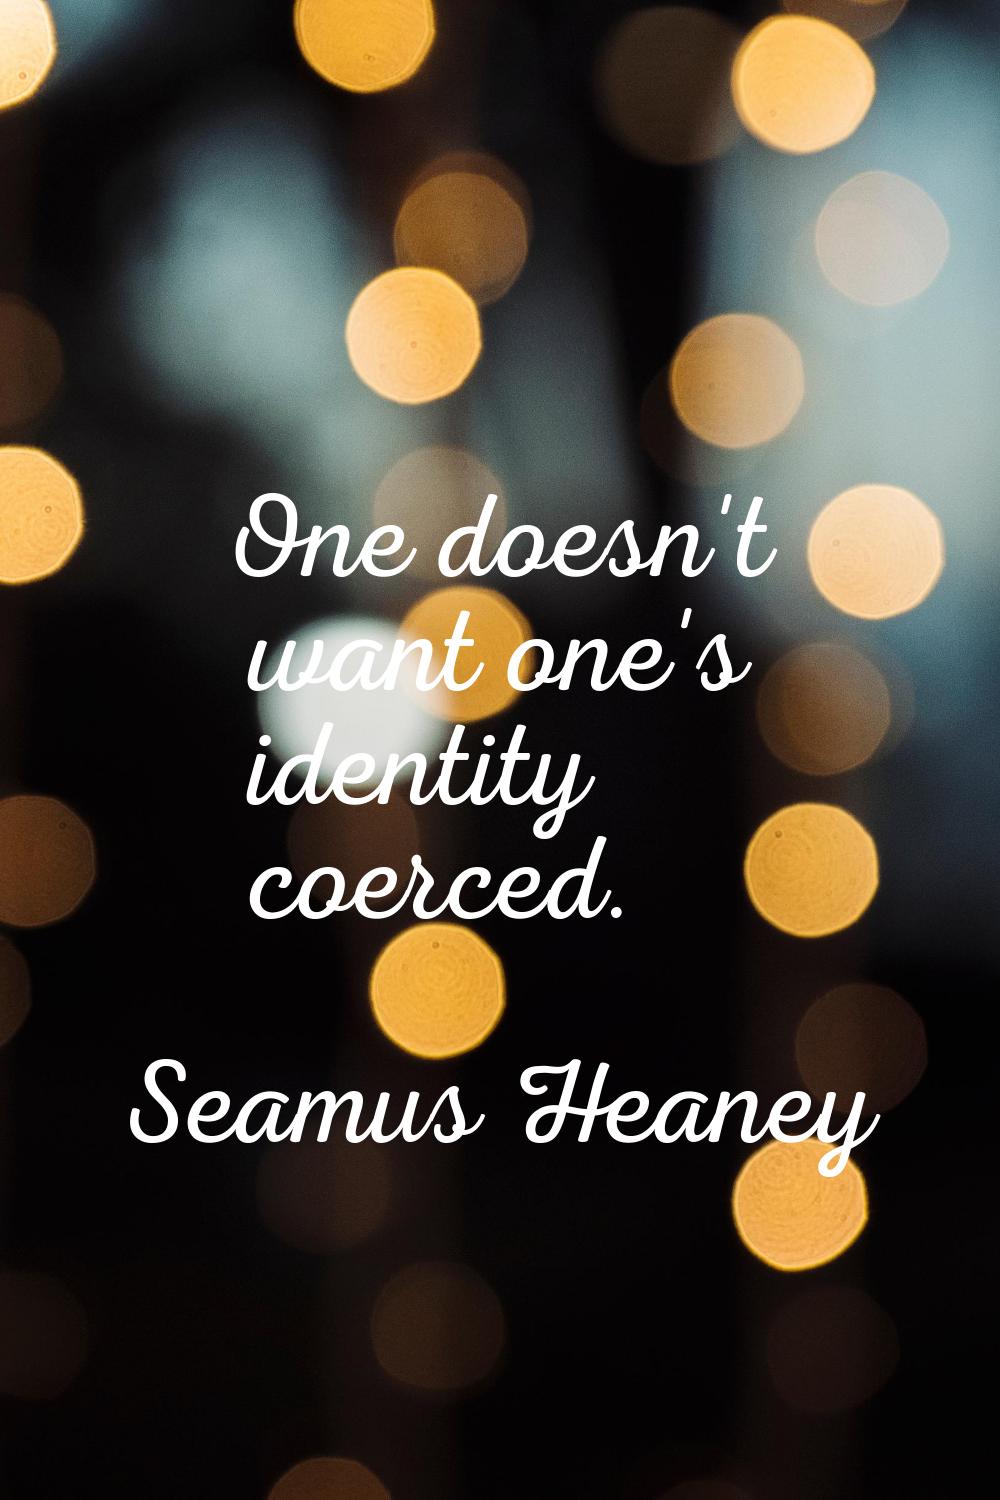 One doesn't want one's identity coerced.